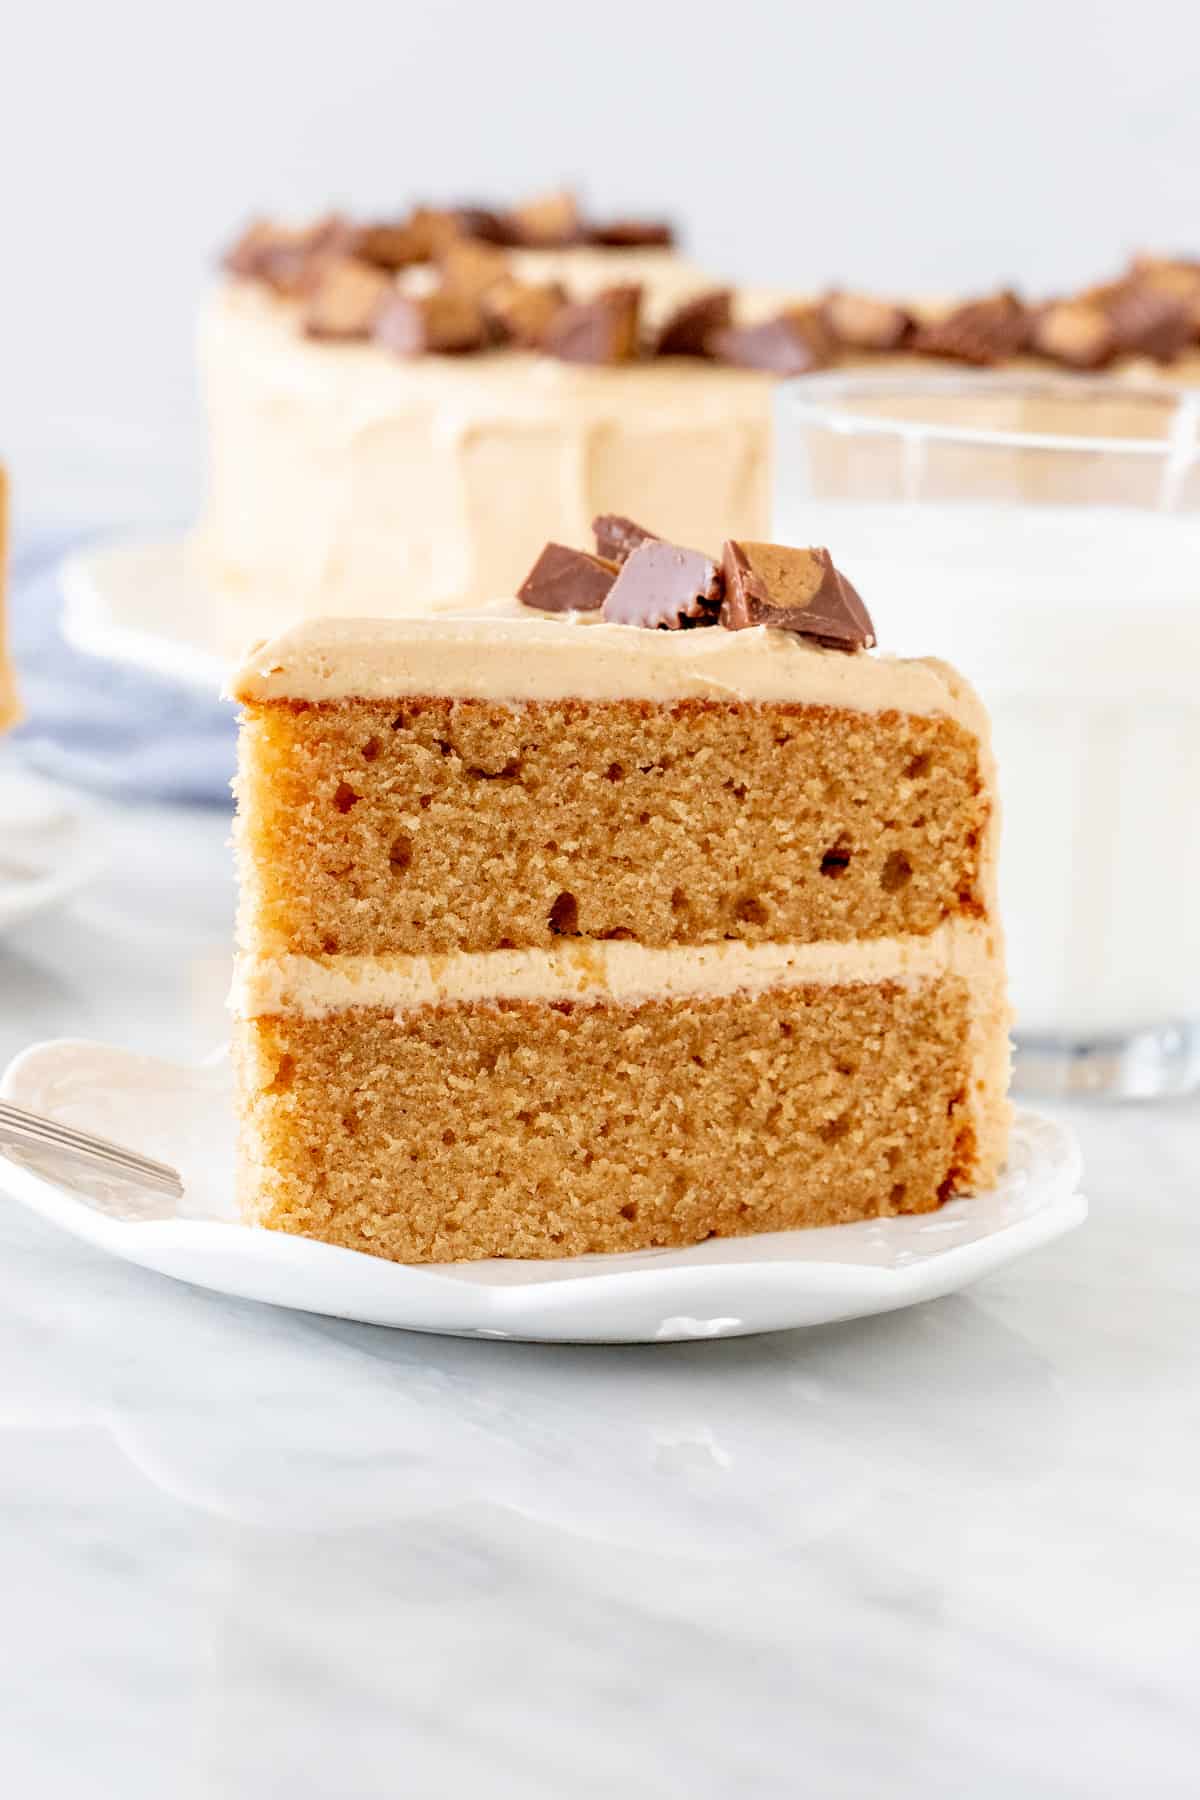 Slice of moist peanut butter cake with peanut butter frosting